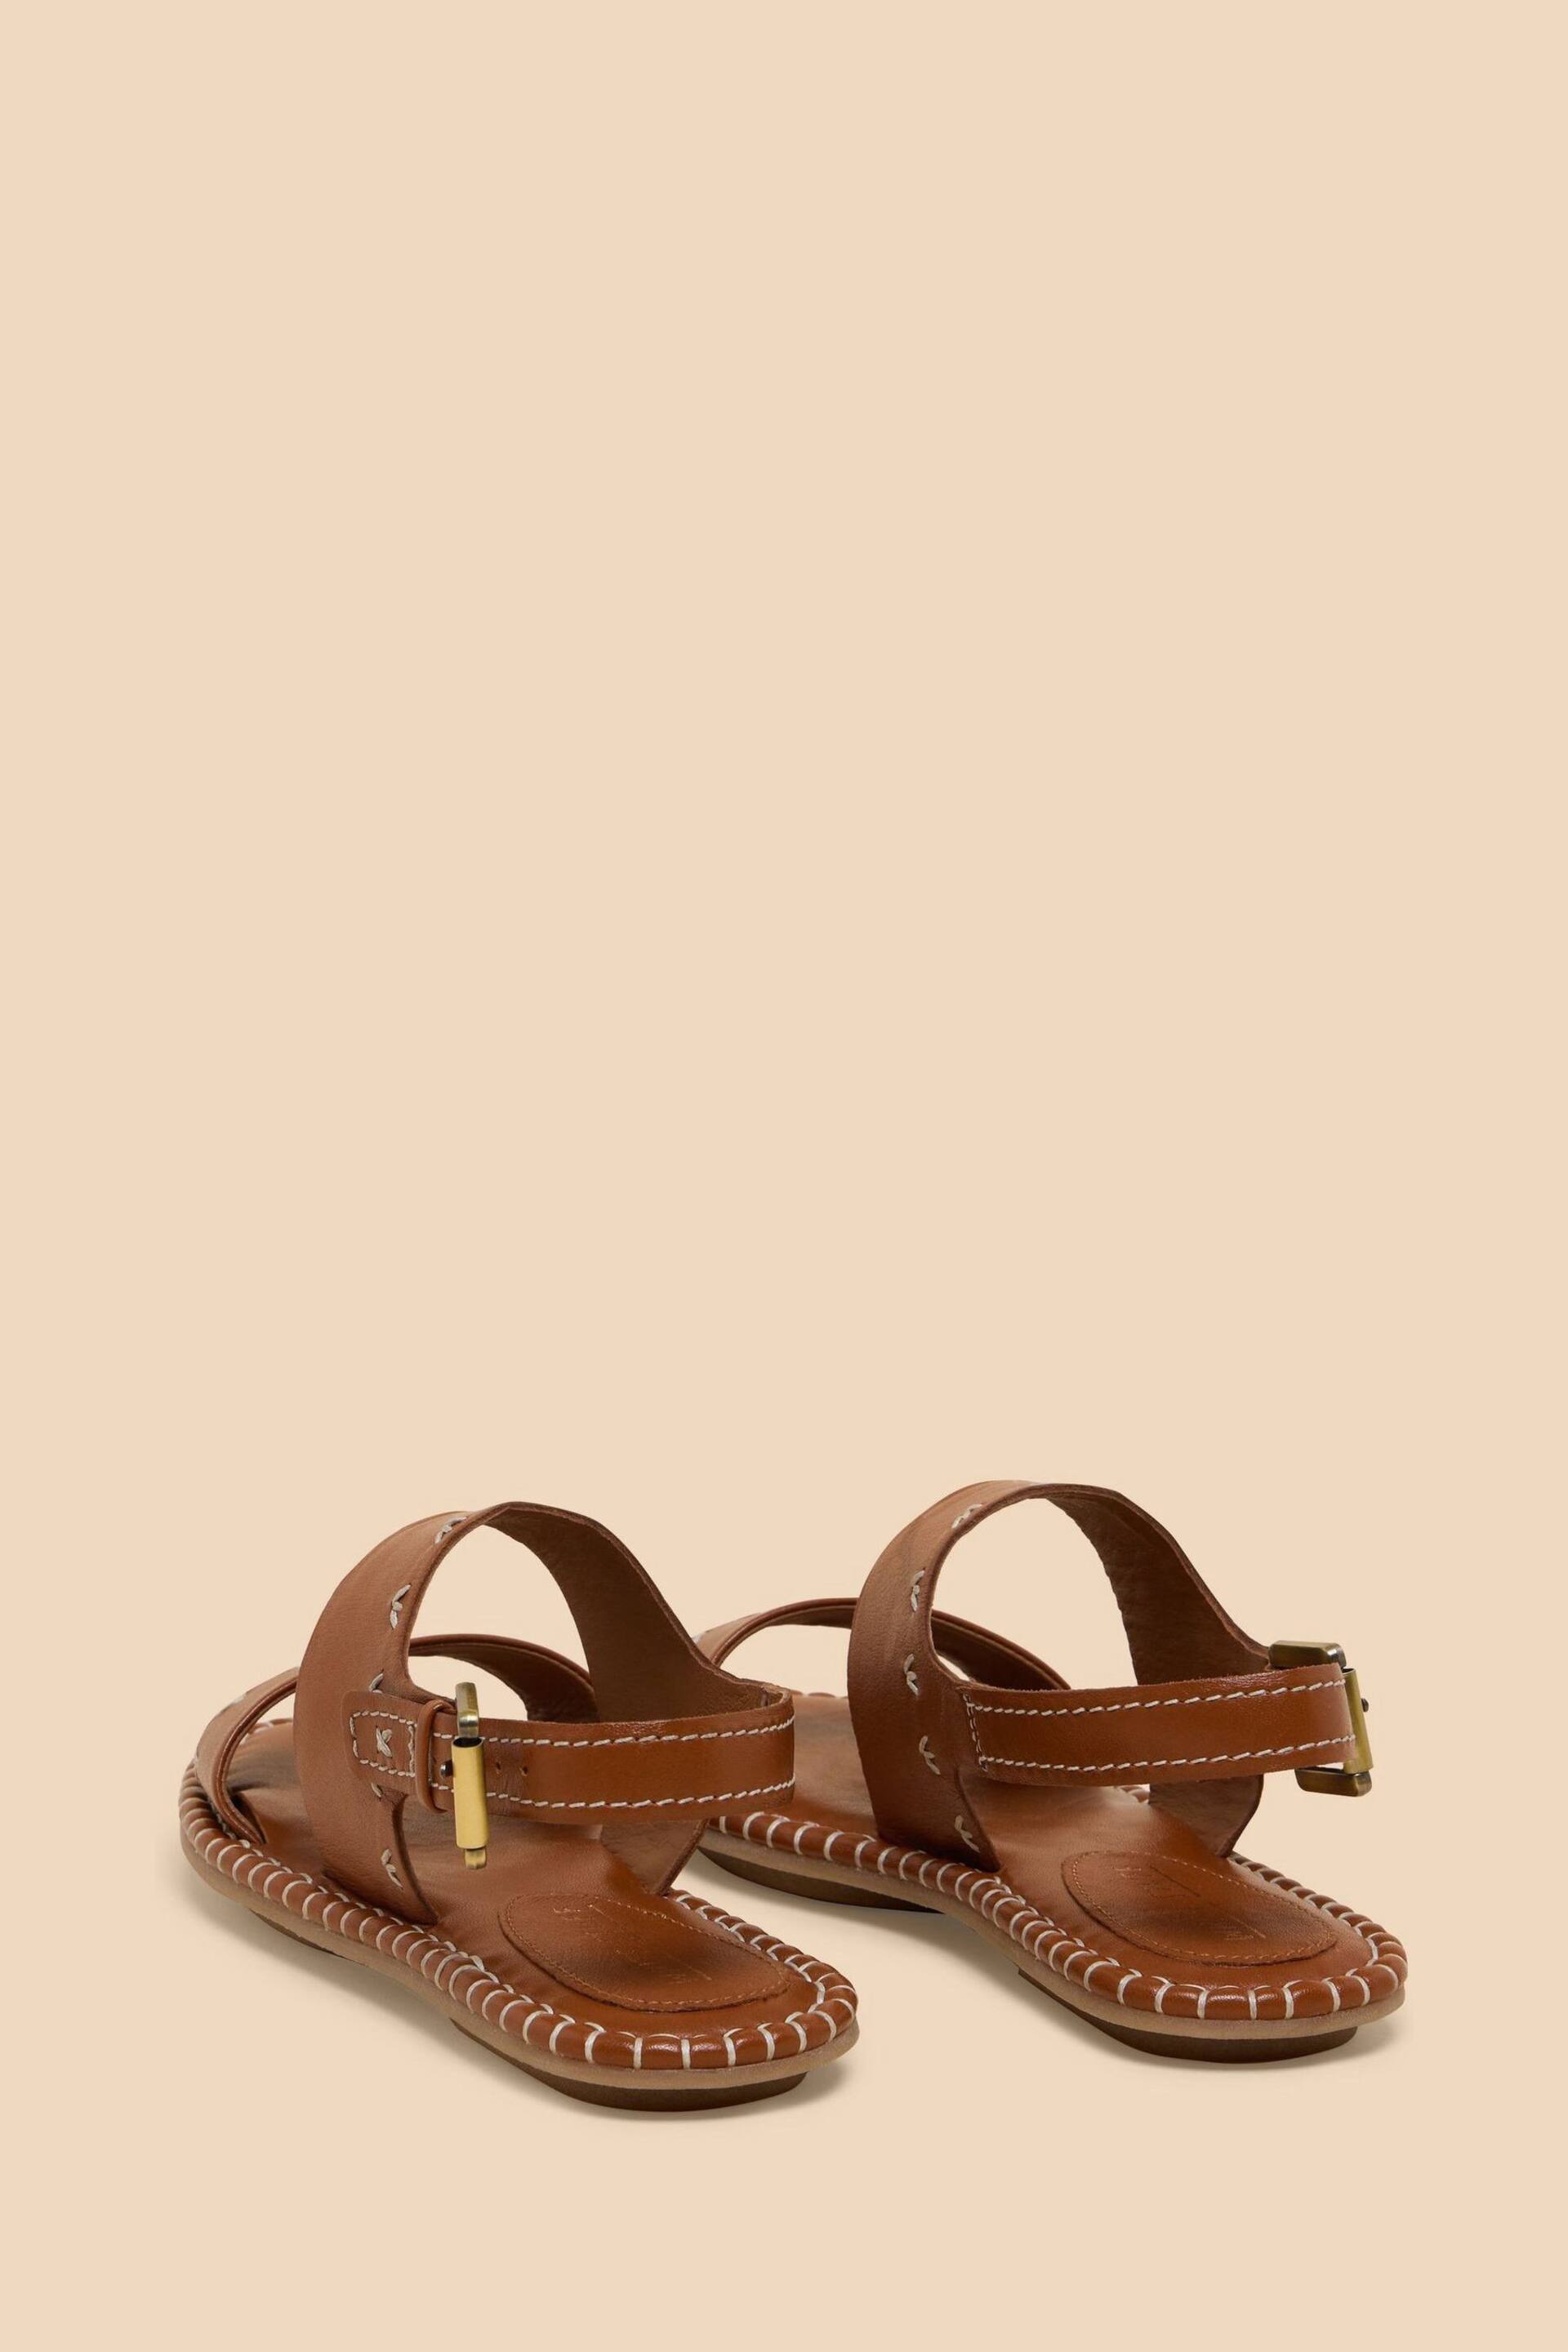 White Stuff Brown Sweetpea Leather Sandals - Image 3 of 4